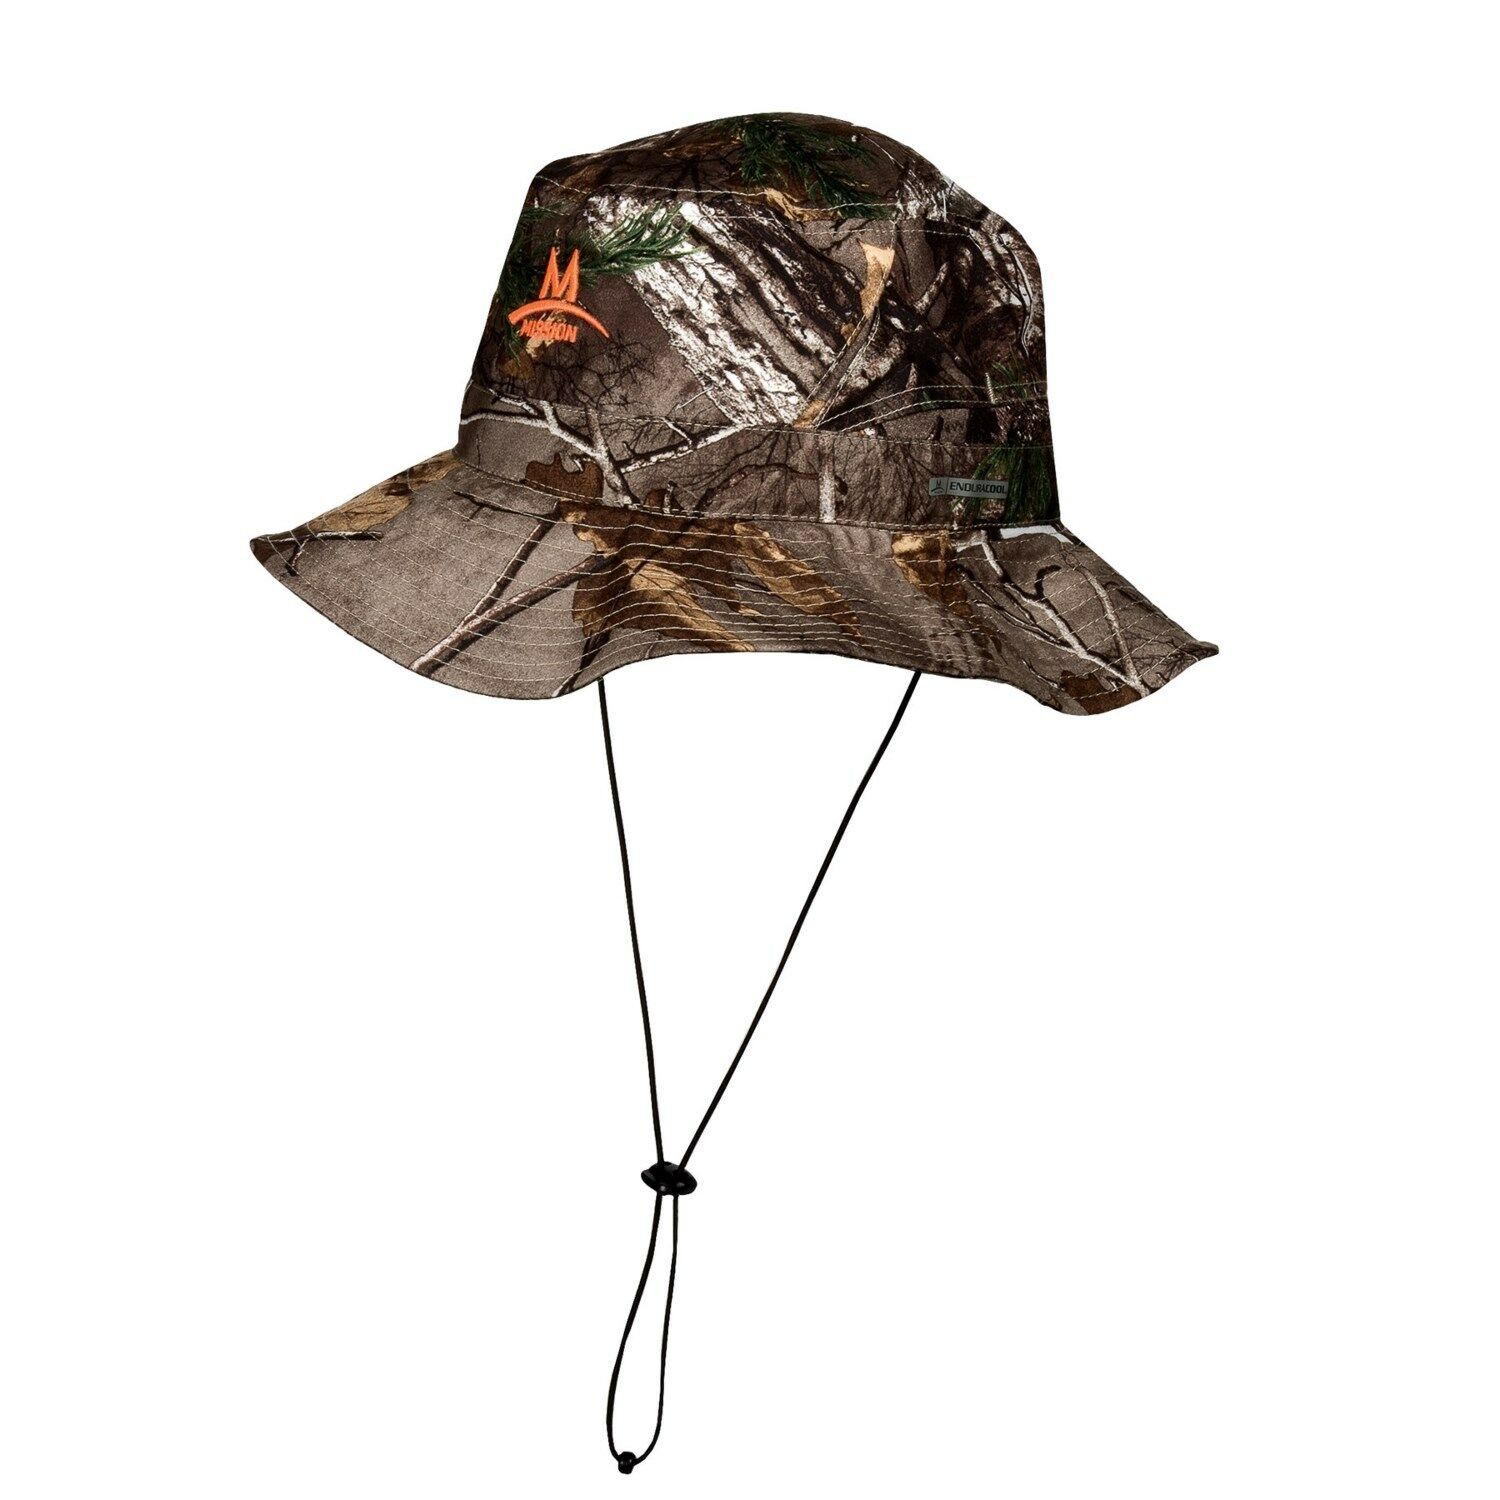 Mission Cooling Bucket Hat RealTree Camo UPF 50 One Size Men or Women ktmart 0